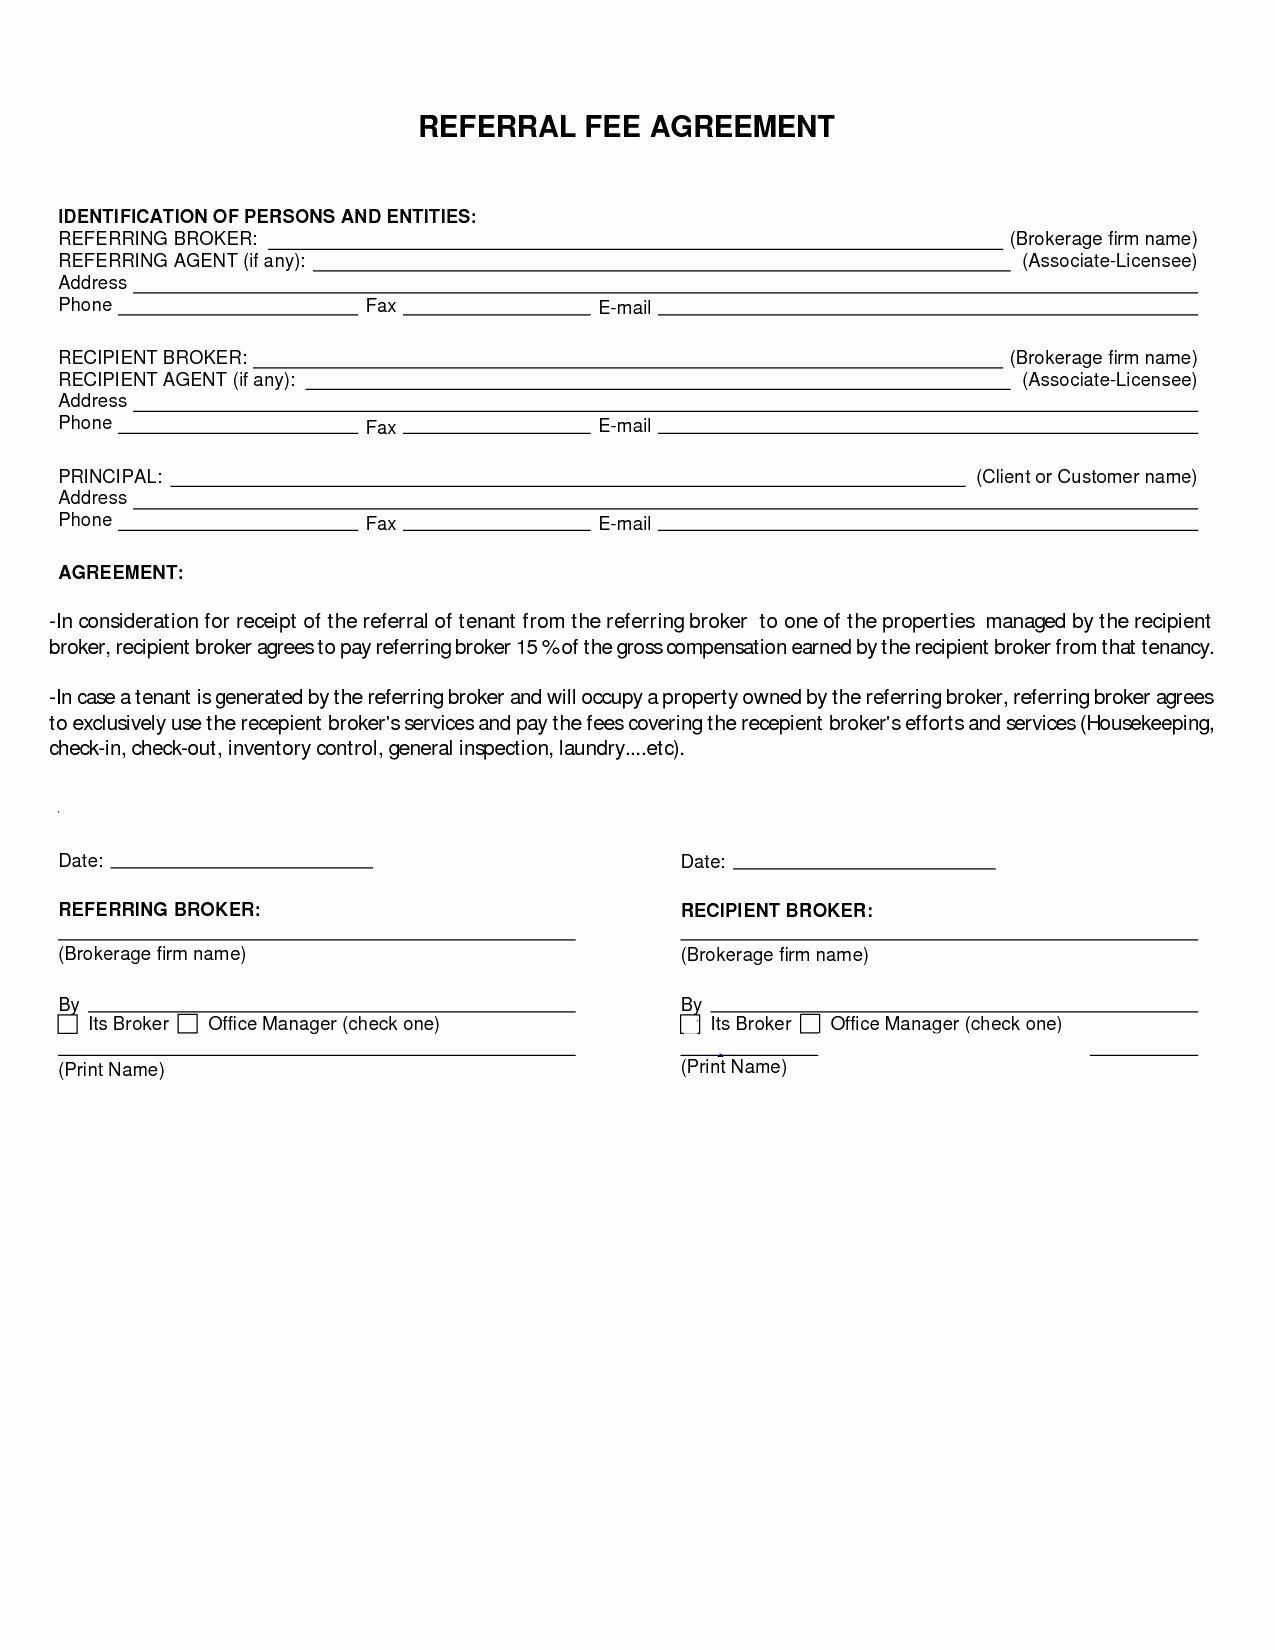 Referral Fee Agreement Template Unique 50 Useful Real Estate Referral Agreement Pe E